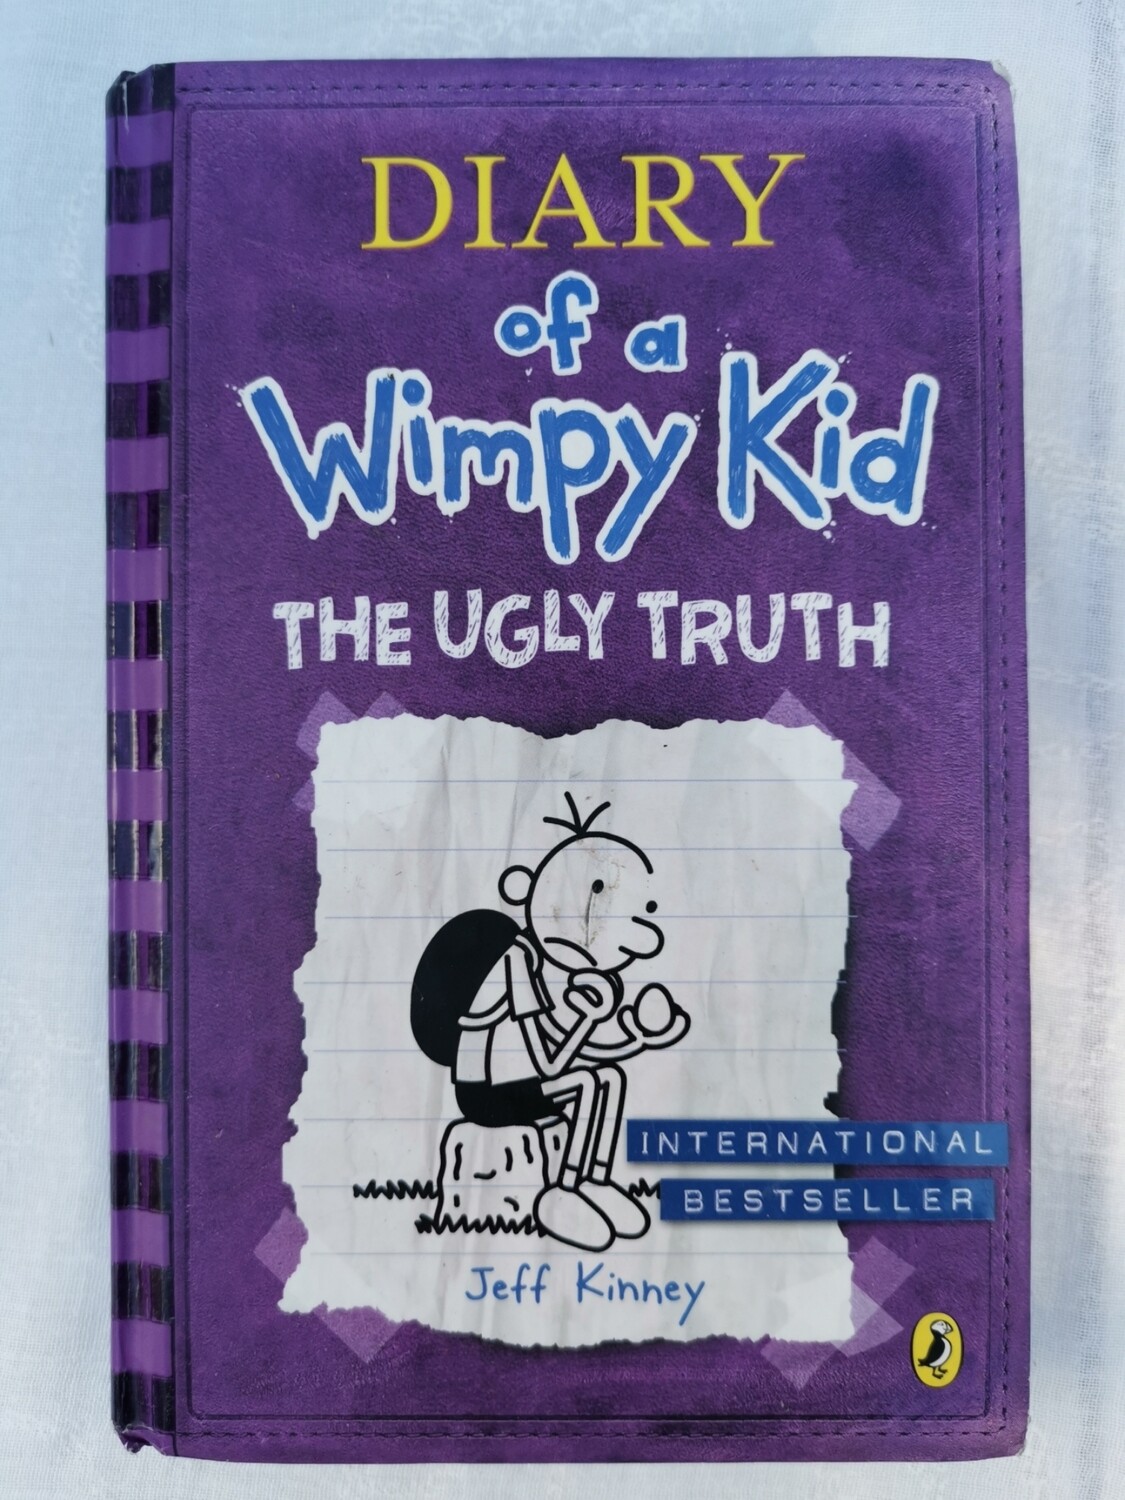 Diary of a Wimpy kid the ugly truth, Jeff Kinney